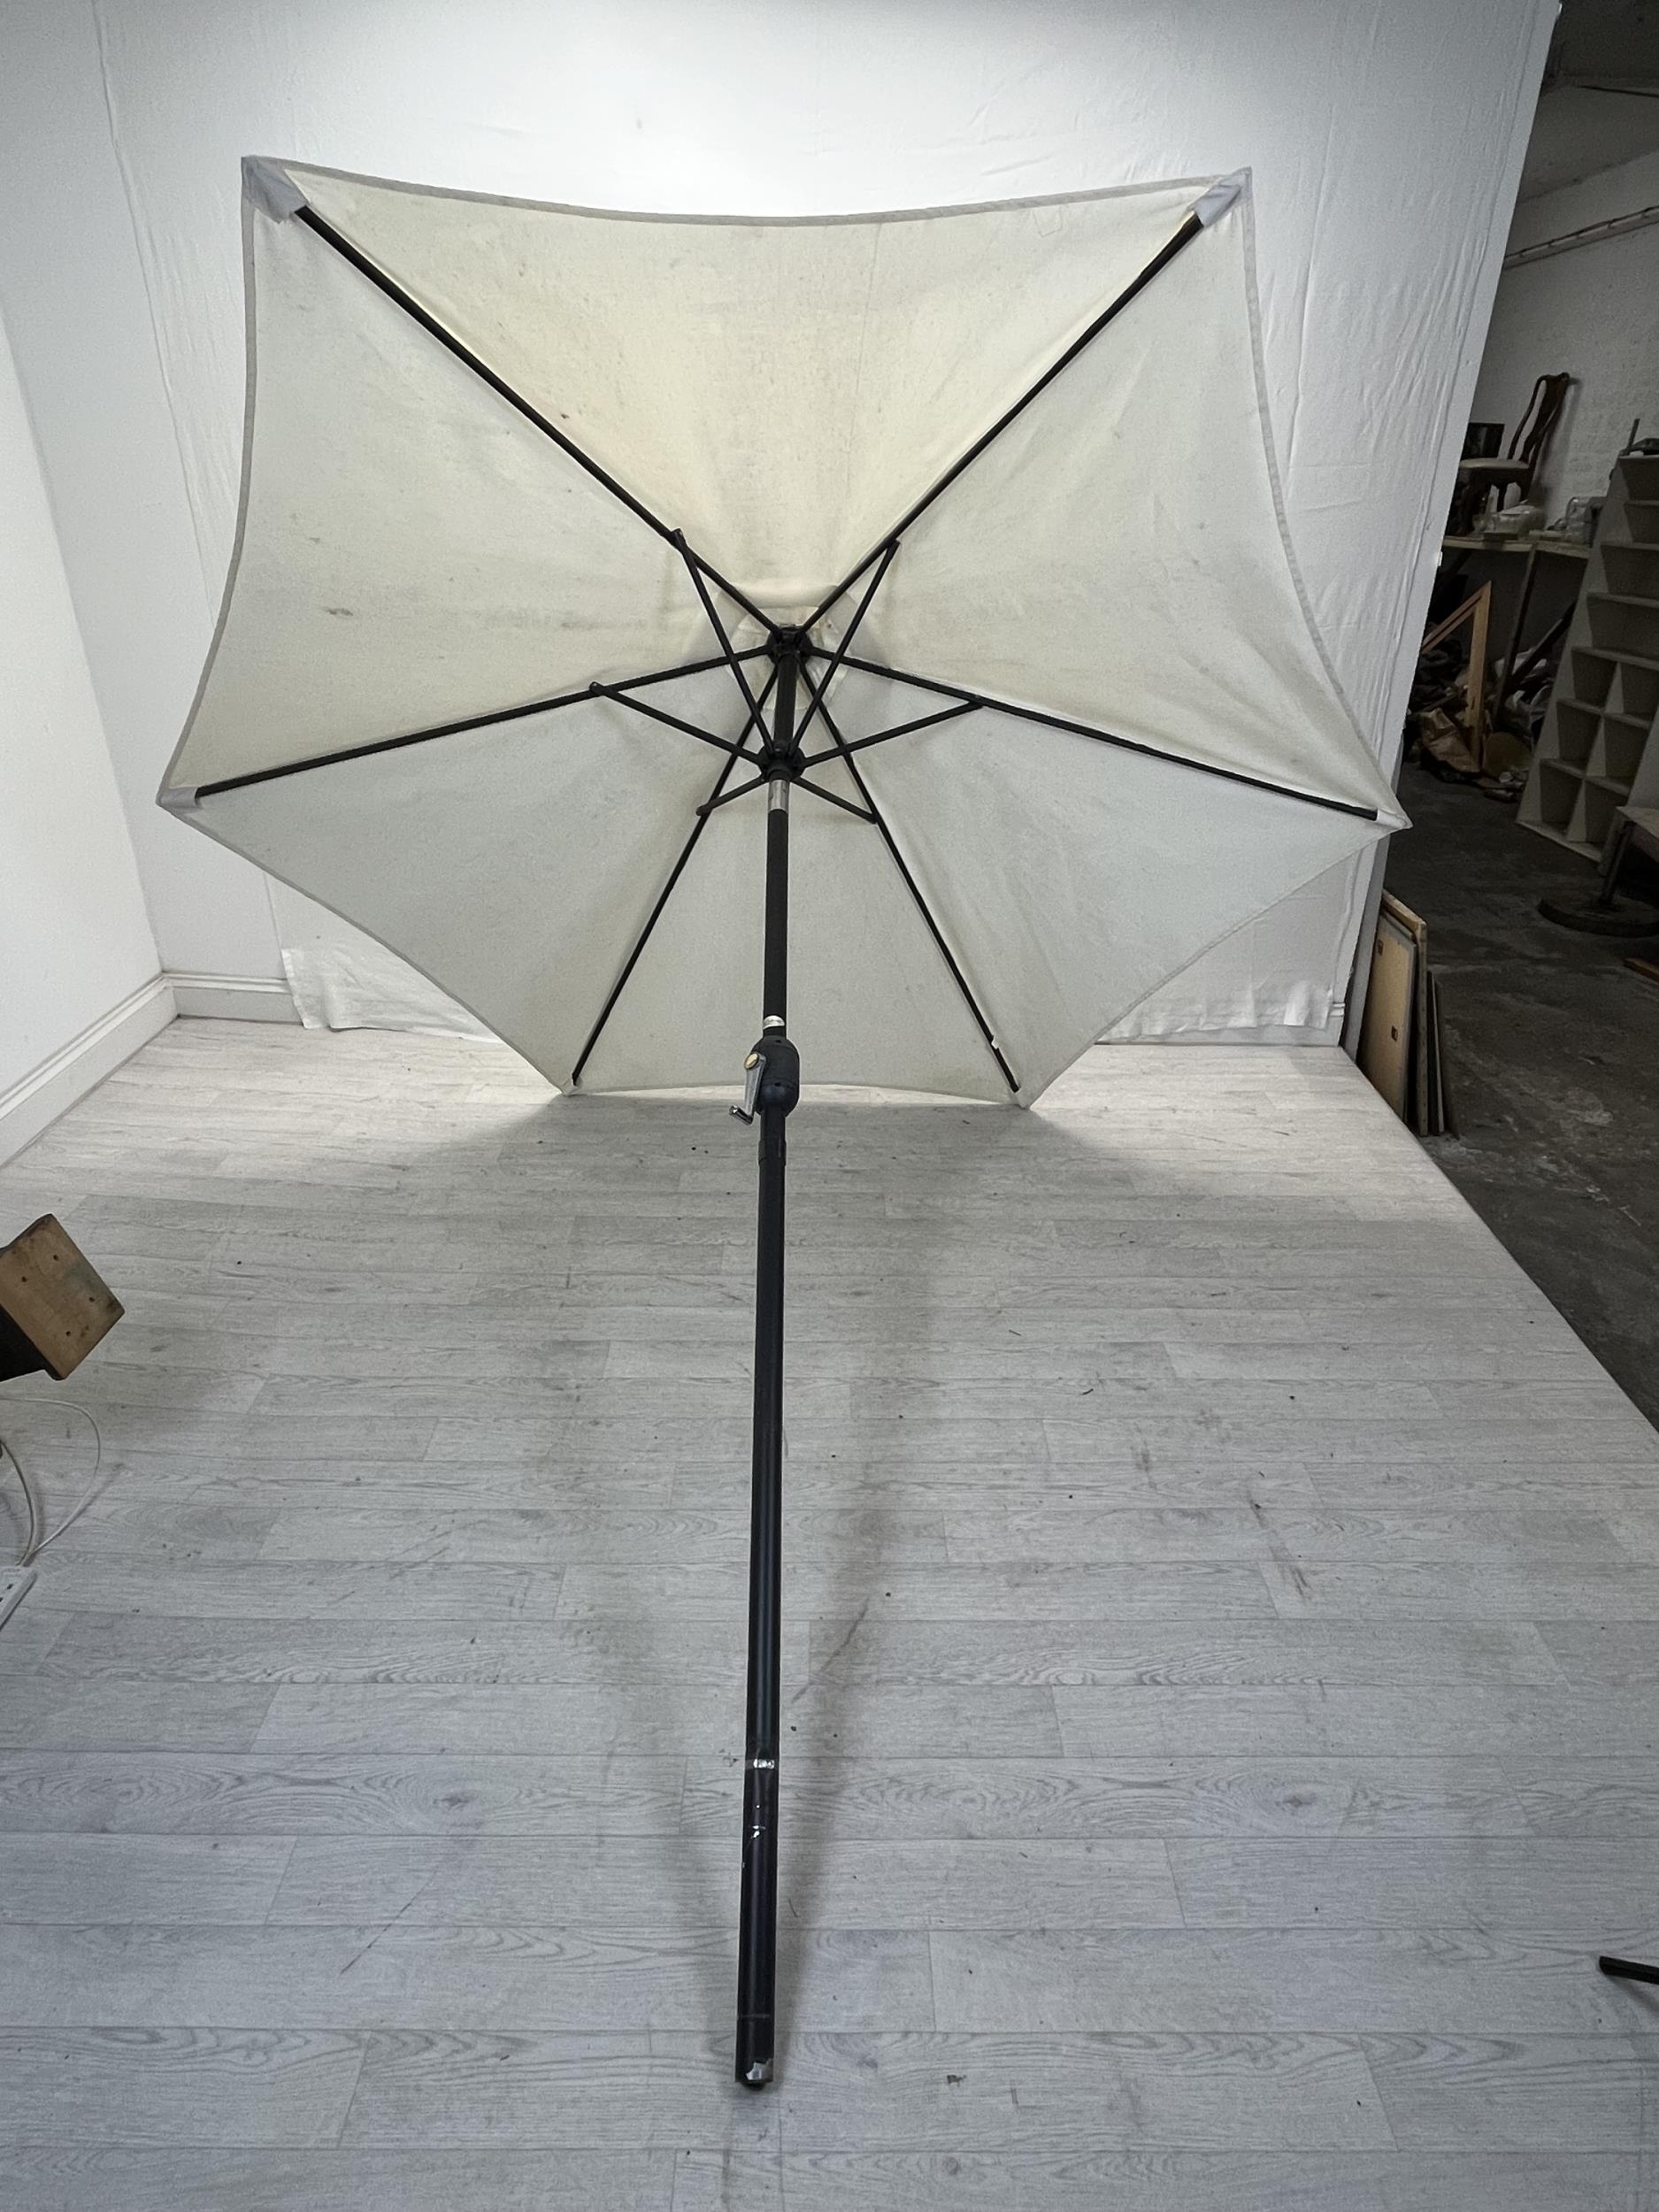 An adjustable wind up parasol, Dia.228cm H.230cm. with concrete base along with another slightly - Image 2 of 7